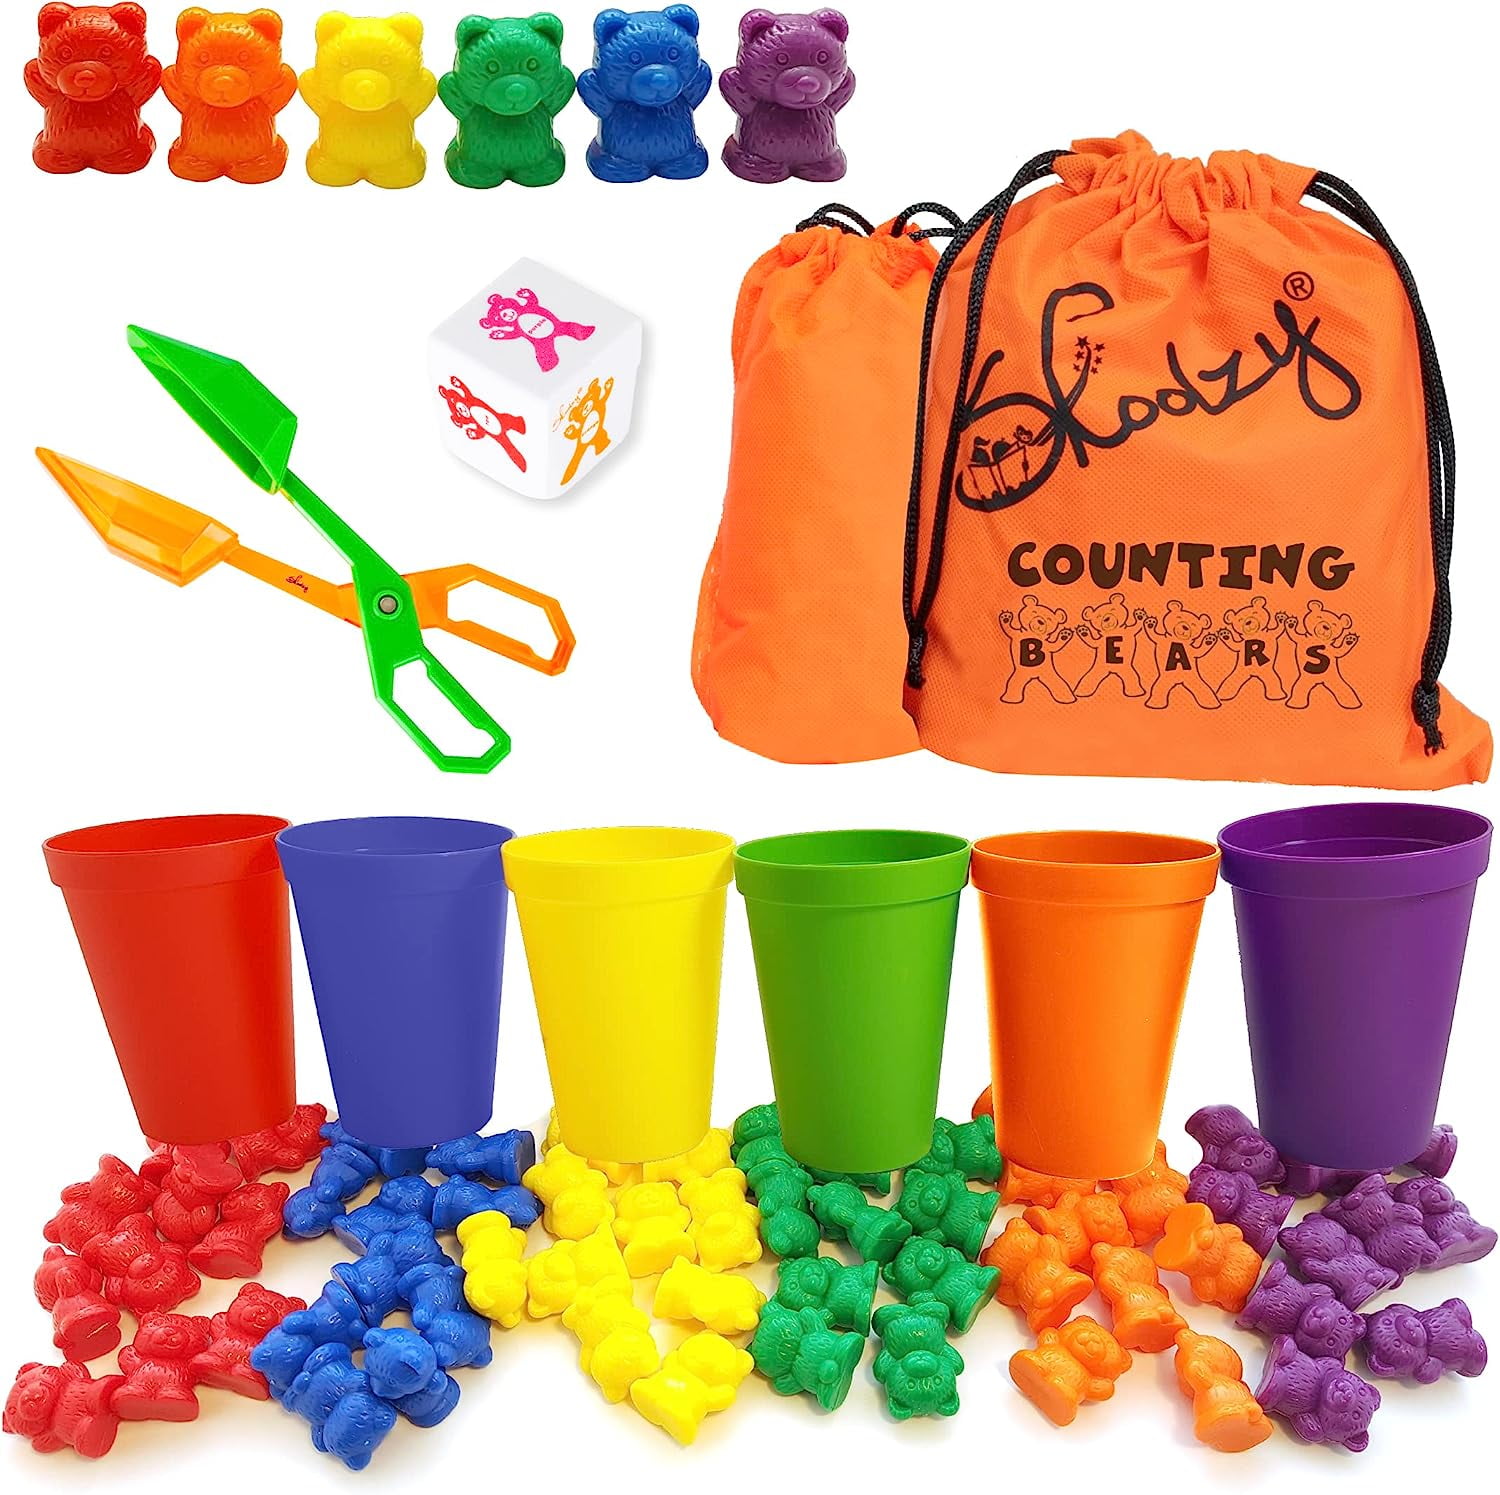 Counting Bears with Stacking Cups Montessori Educational Sorting